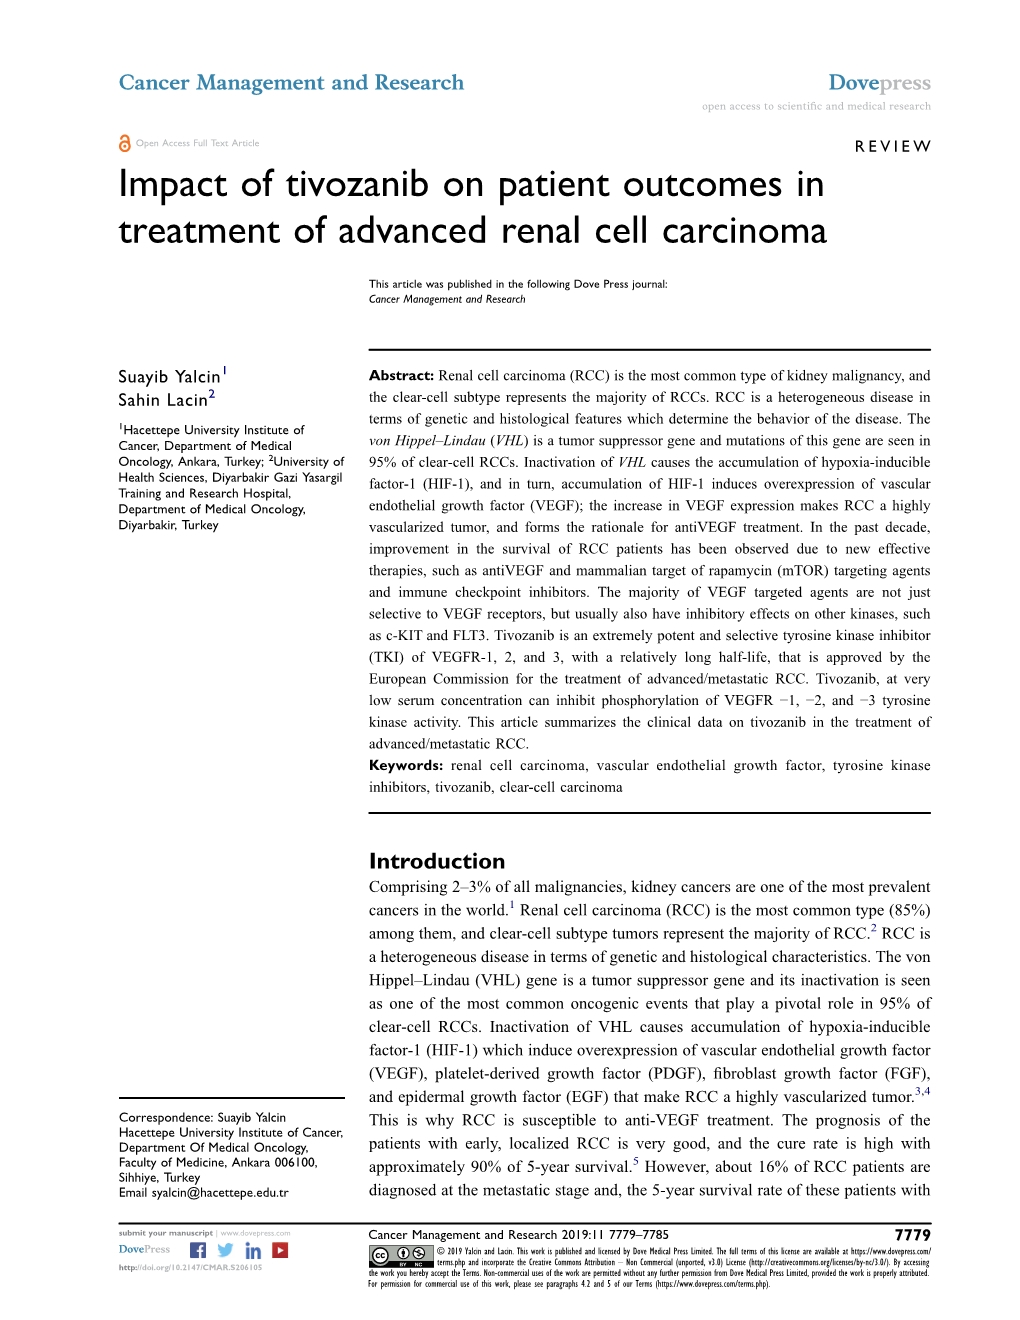 Impact of Tivozanib on Patient Outcomes in Treatment of Advanced Renal Cell Carcinoma